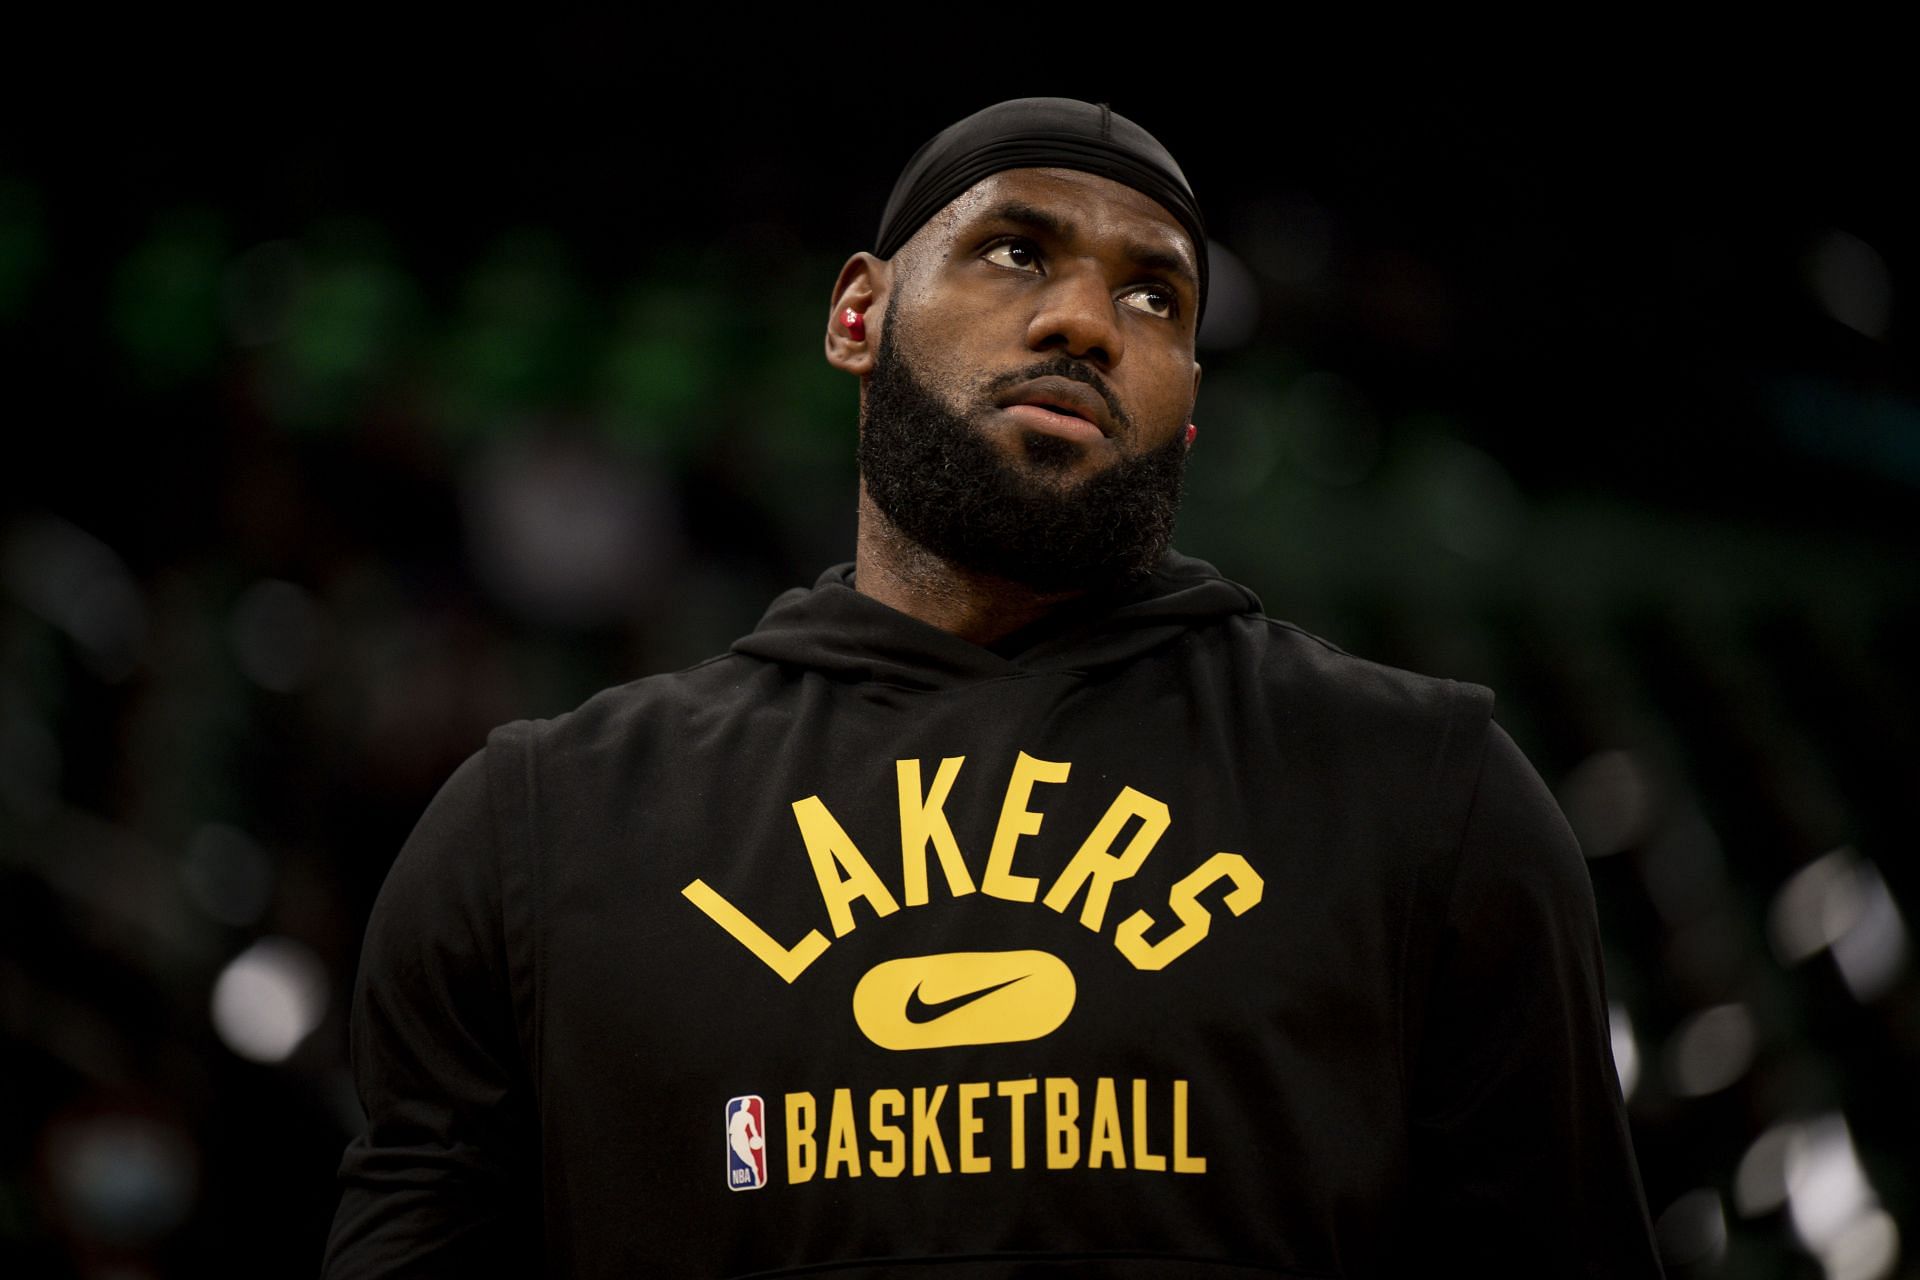 Four-time MVP and 17-time All-Star LeBron James of the Los Angeles Lakers